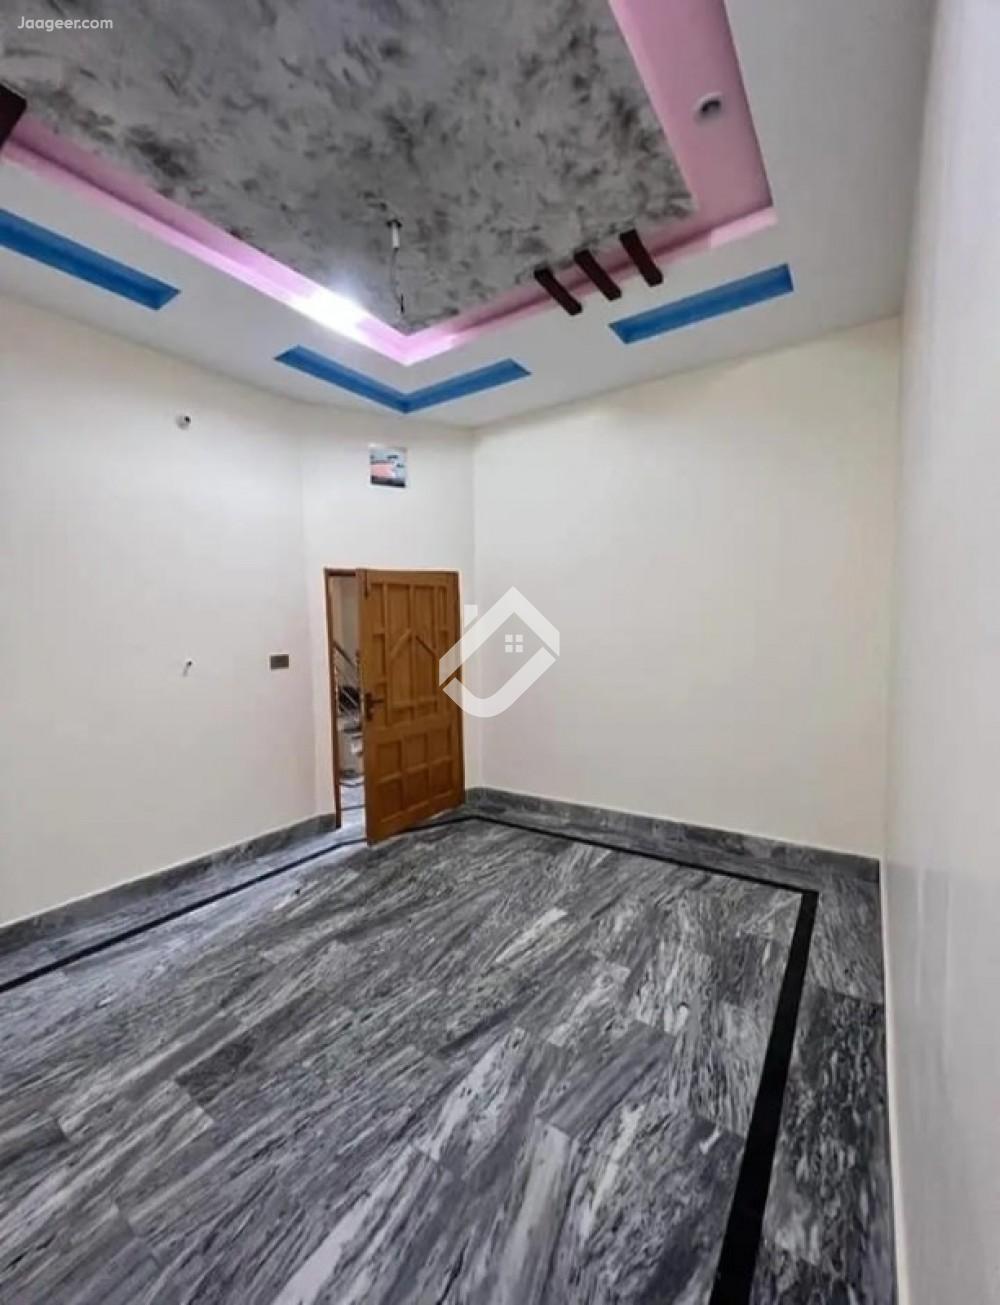 View  2.5 Marla Double Storey House For Sale In Farooq Colony in Farooq Colony, Sargodha